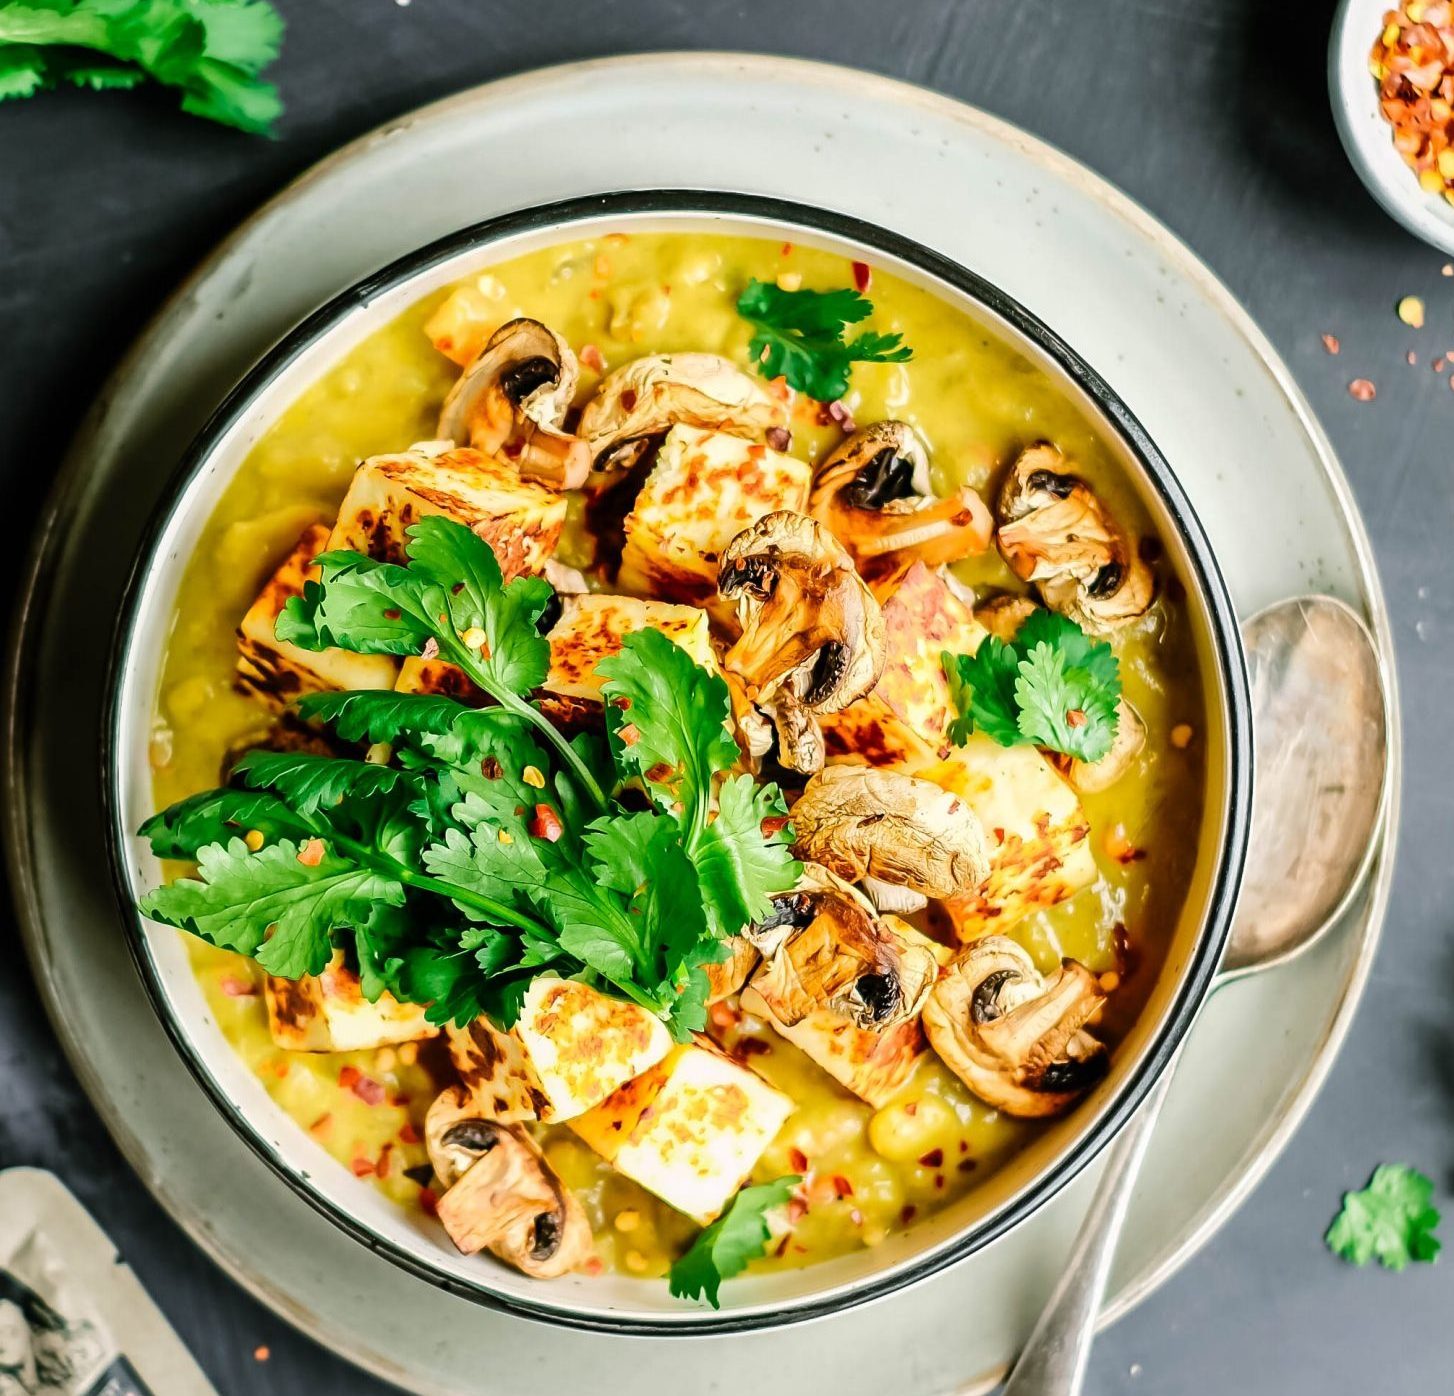 COCONUT LENTIL PANEER CURRY WITH MUSHROOMS